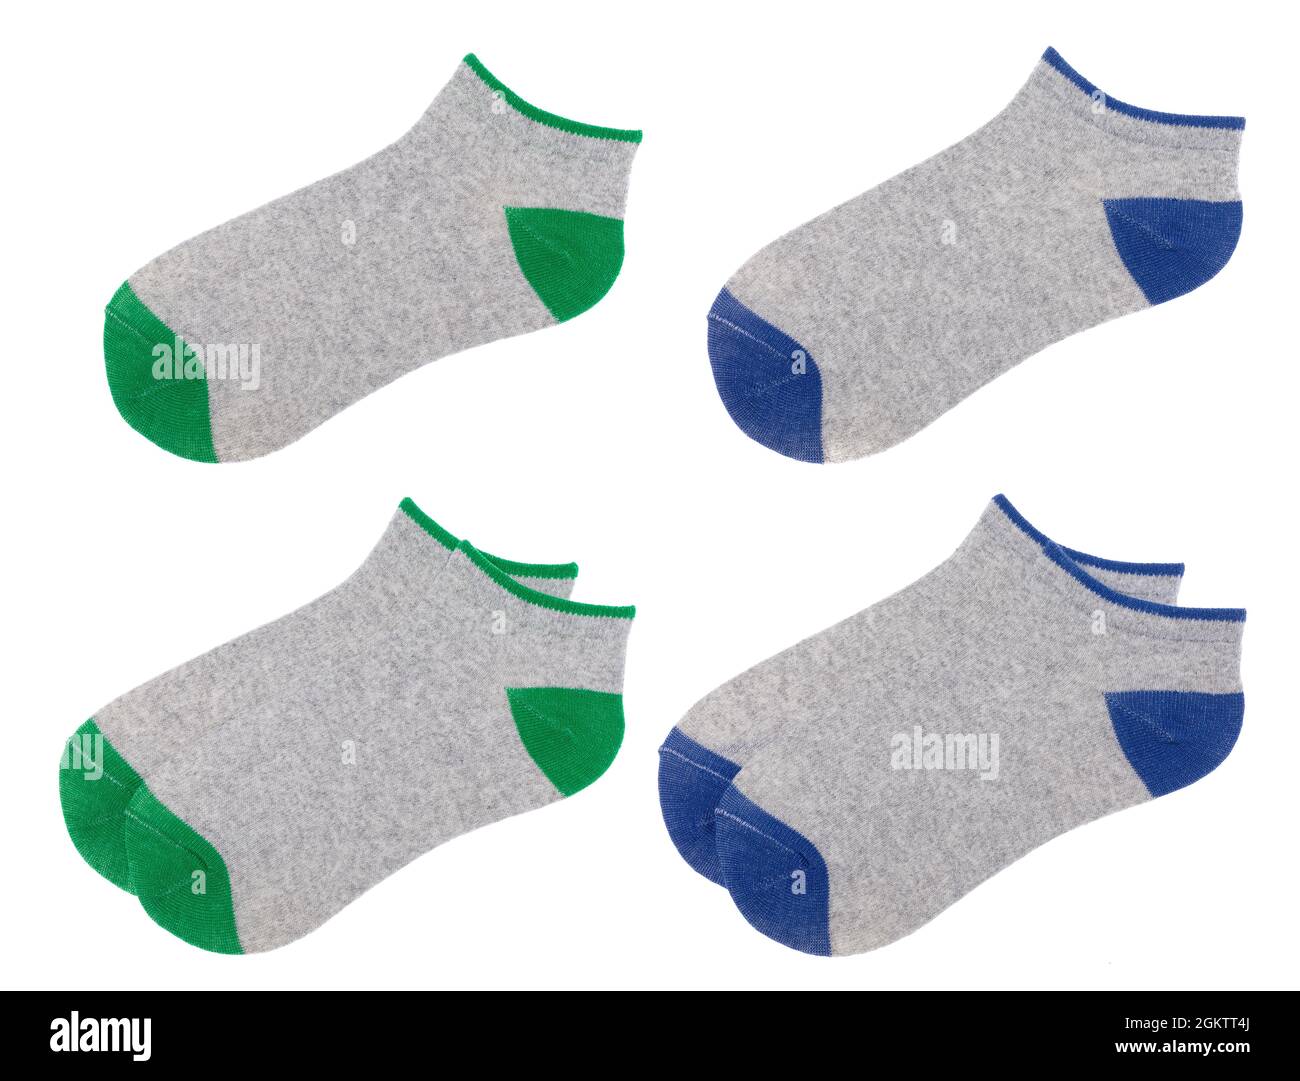 Gray-blue and green flat cotton-blend low cut ankle socks isolated on a white background Stock Photo